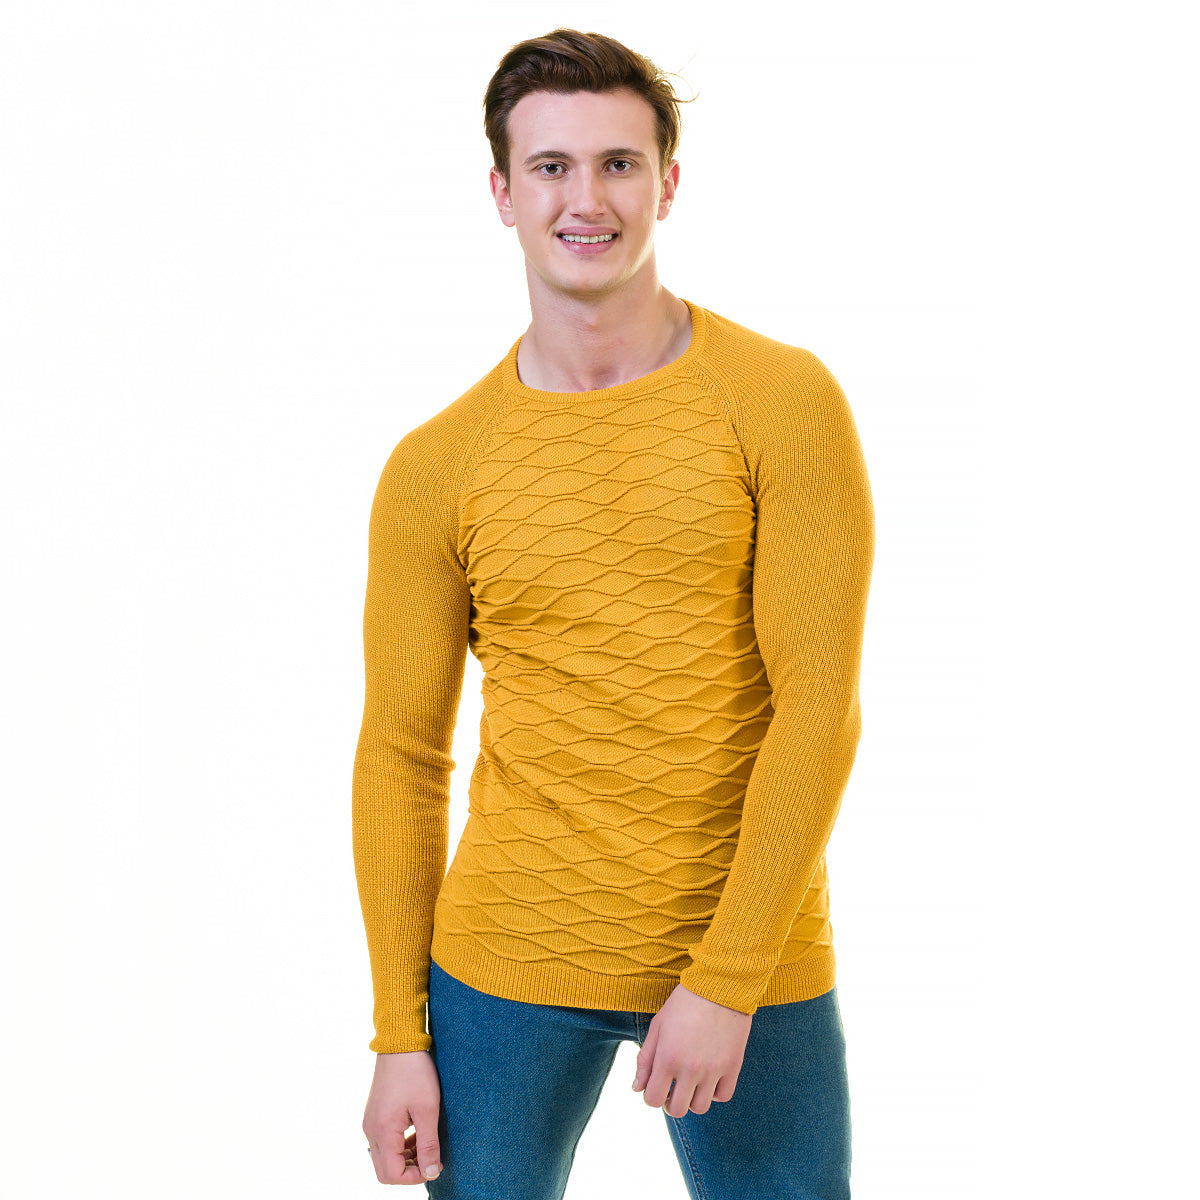 Yellow European Wool Luxury Zippered With Sweater Jacket Warm Winter Tailor Fit